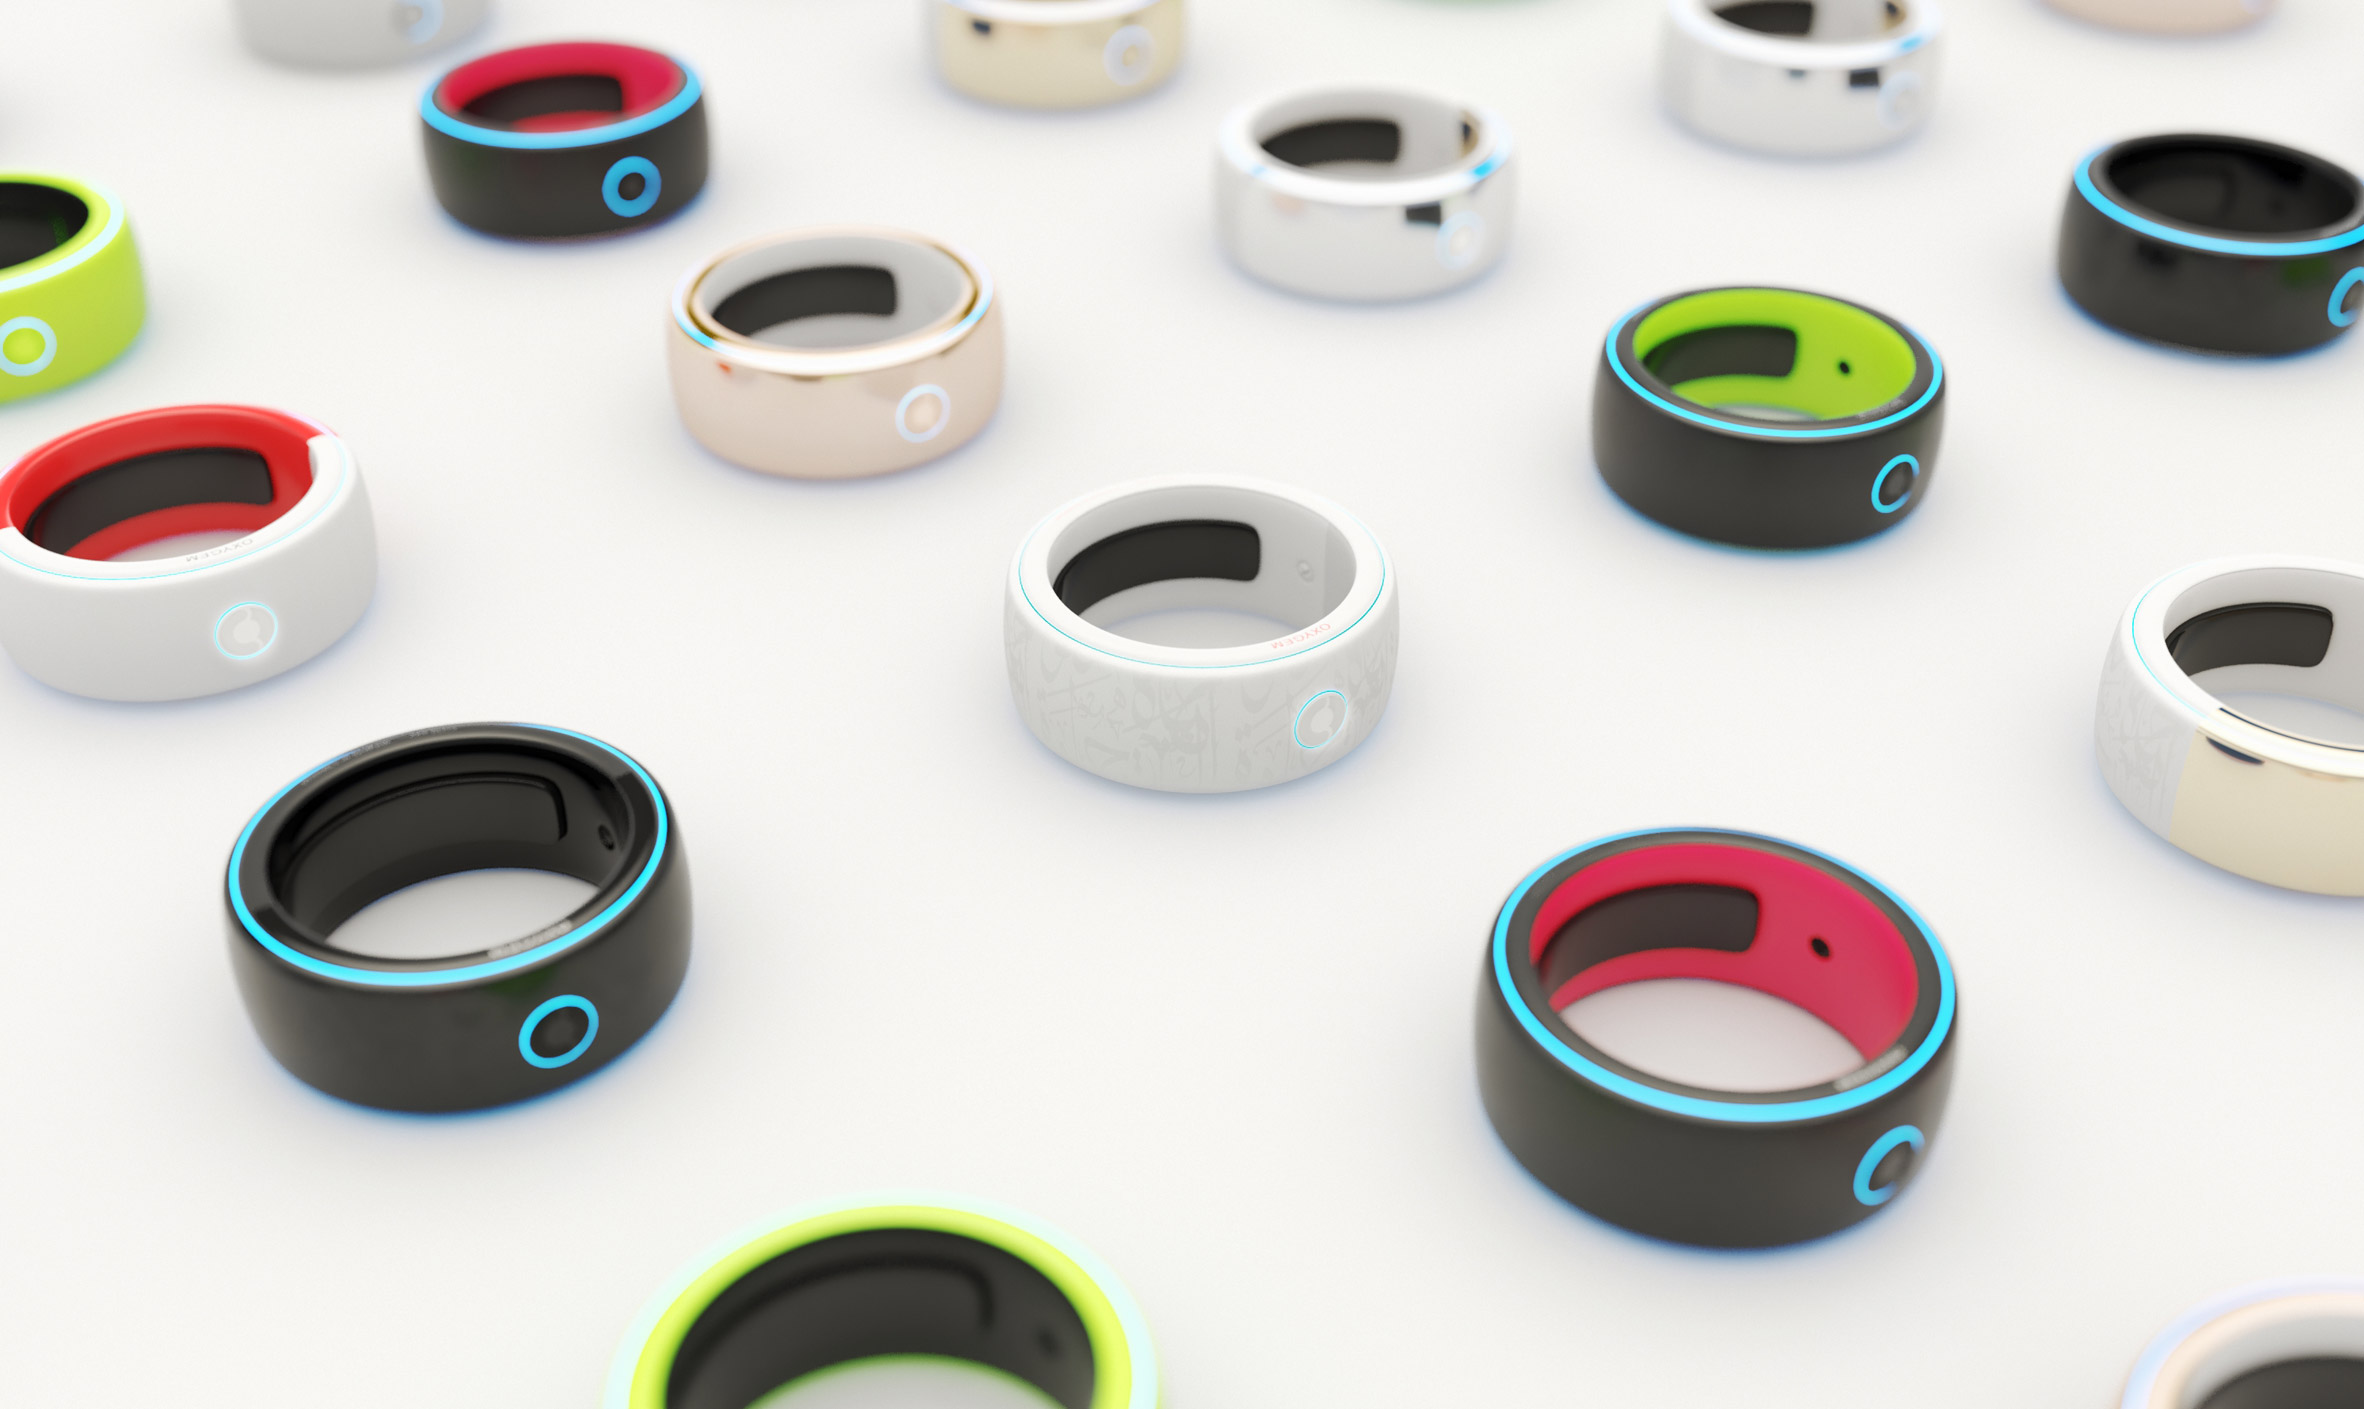 Oxygem smart ring by Hussain Almossawi